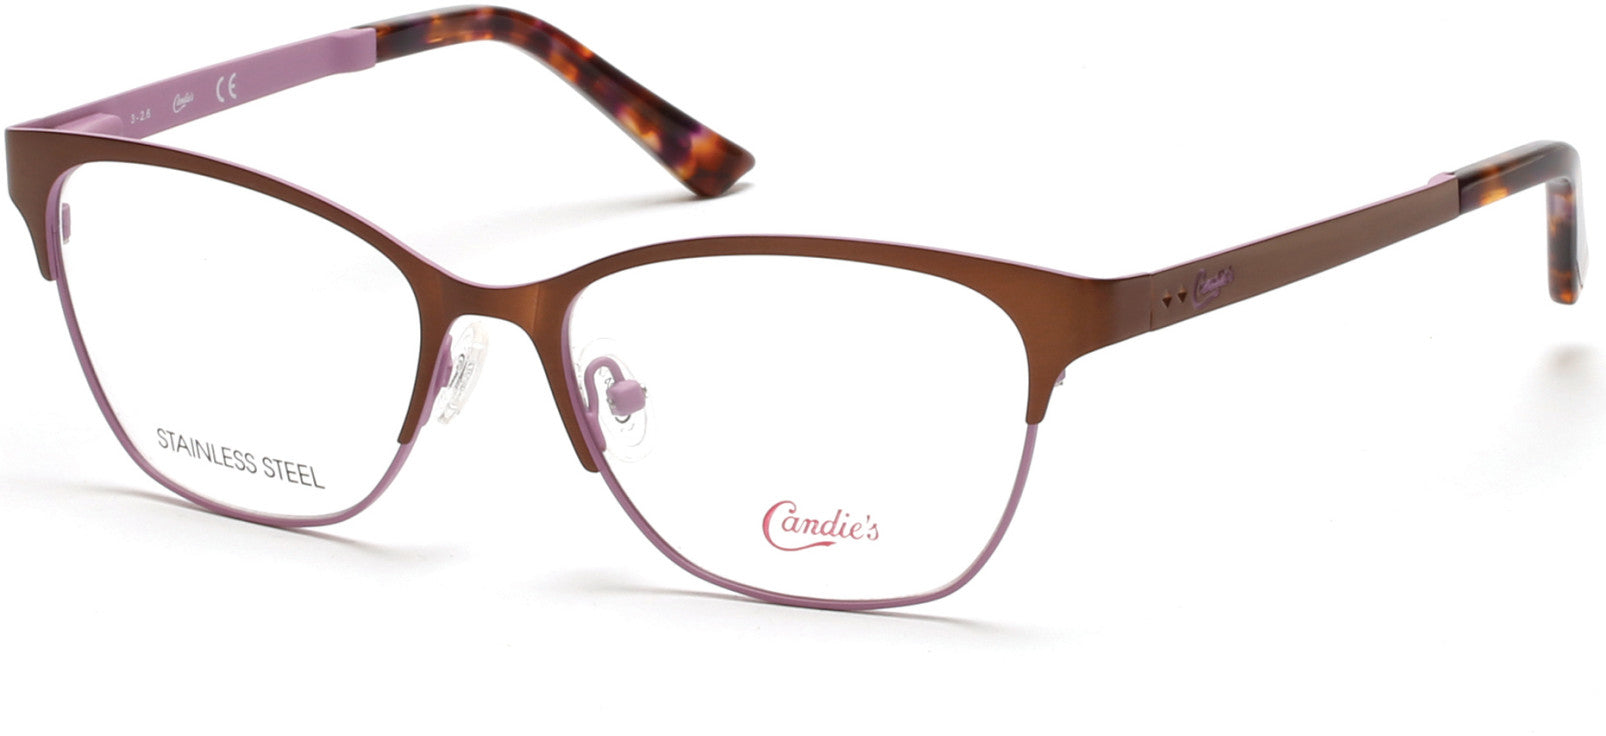 Candies CA0147 Eyeglasses 047-047 - Light Brown/other